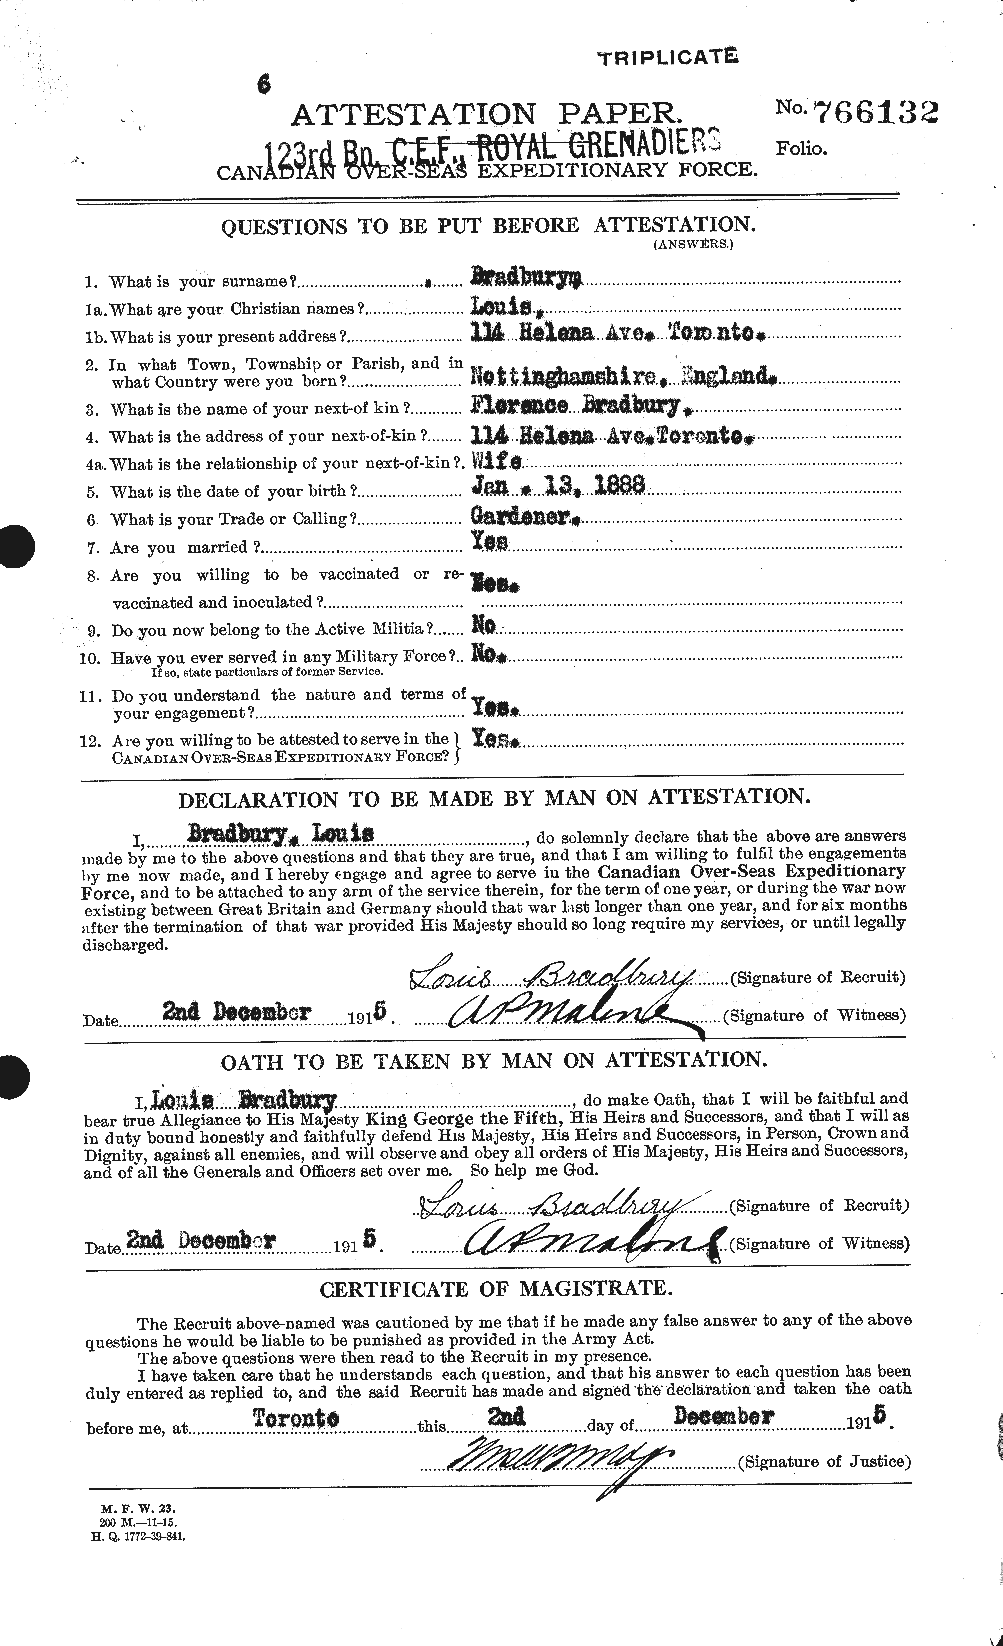 Personnel Records of the First World War - CEF 258529a